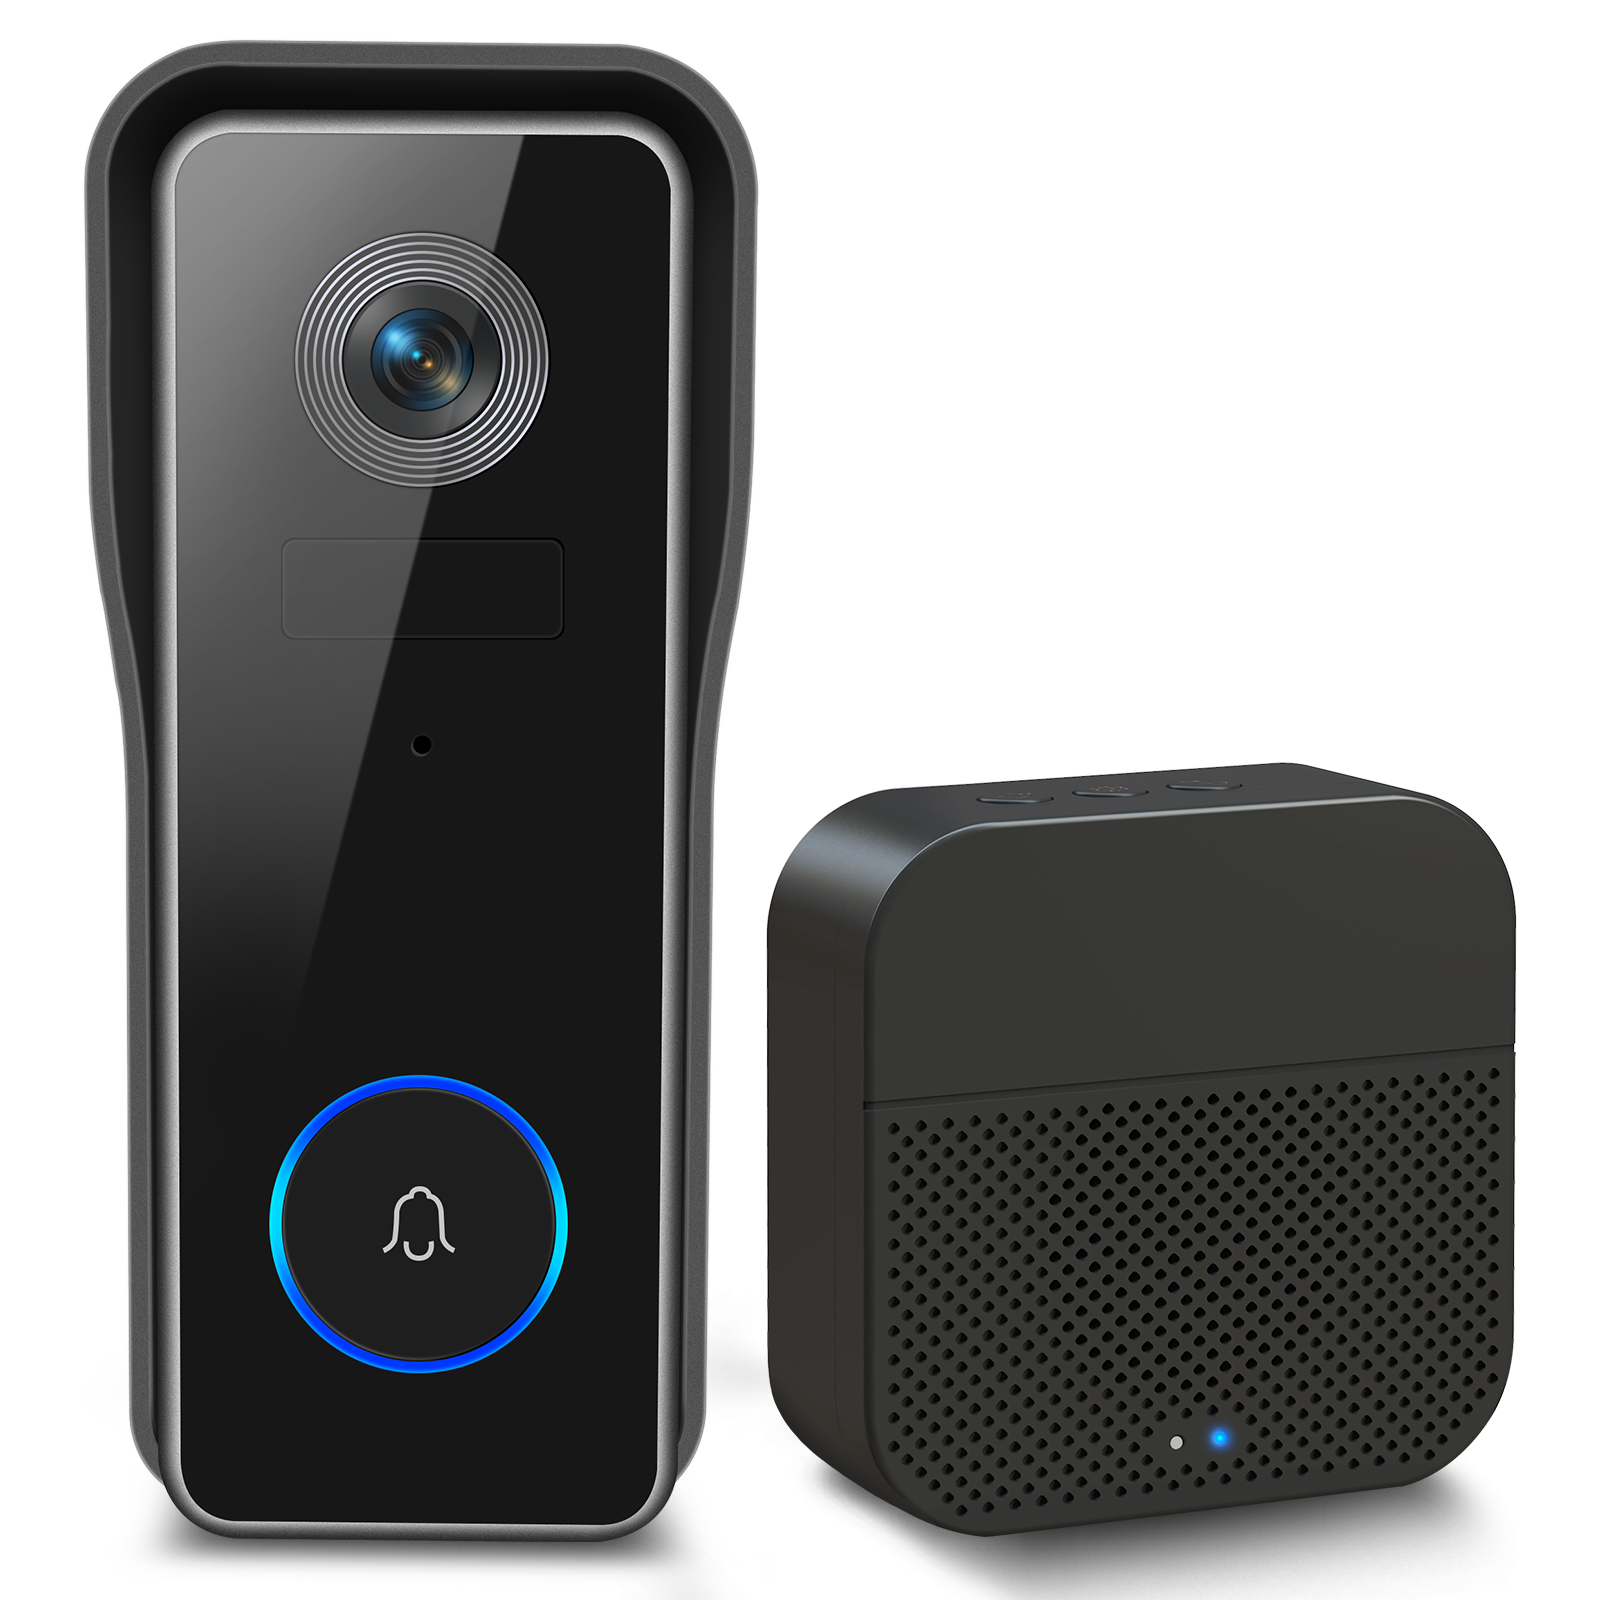 XTU J7 2K wireless Video Doorbell with chime